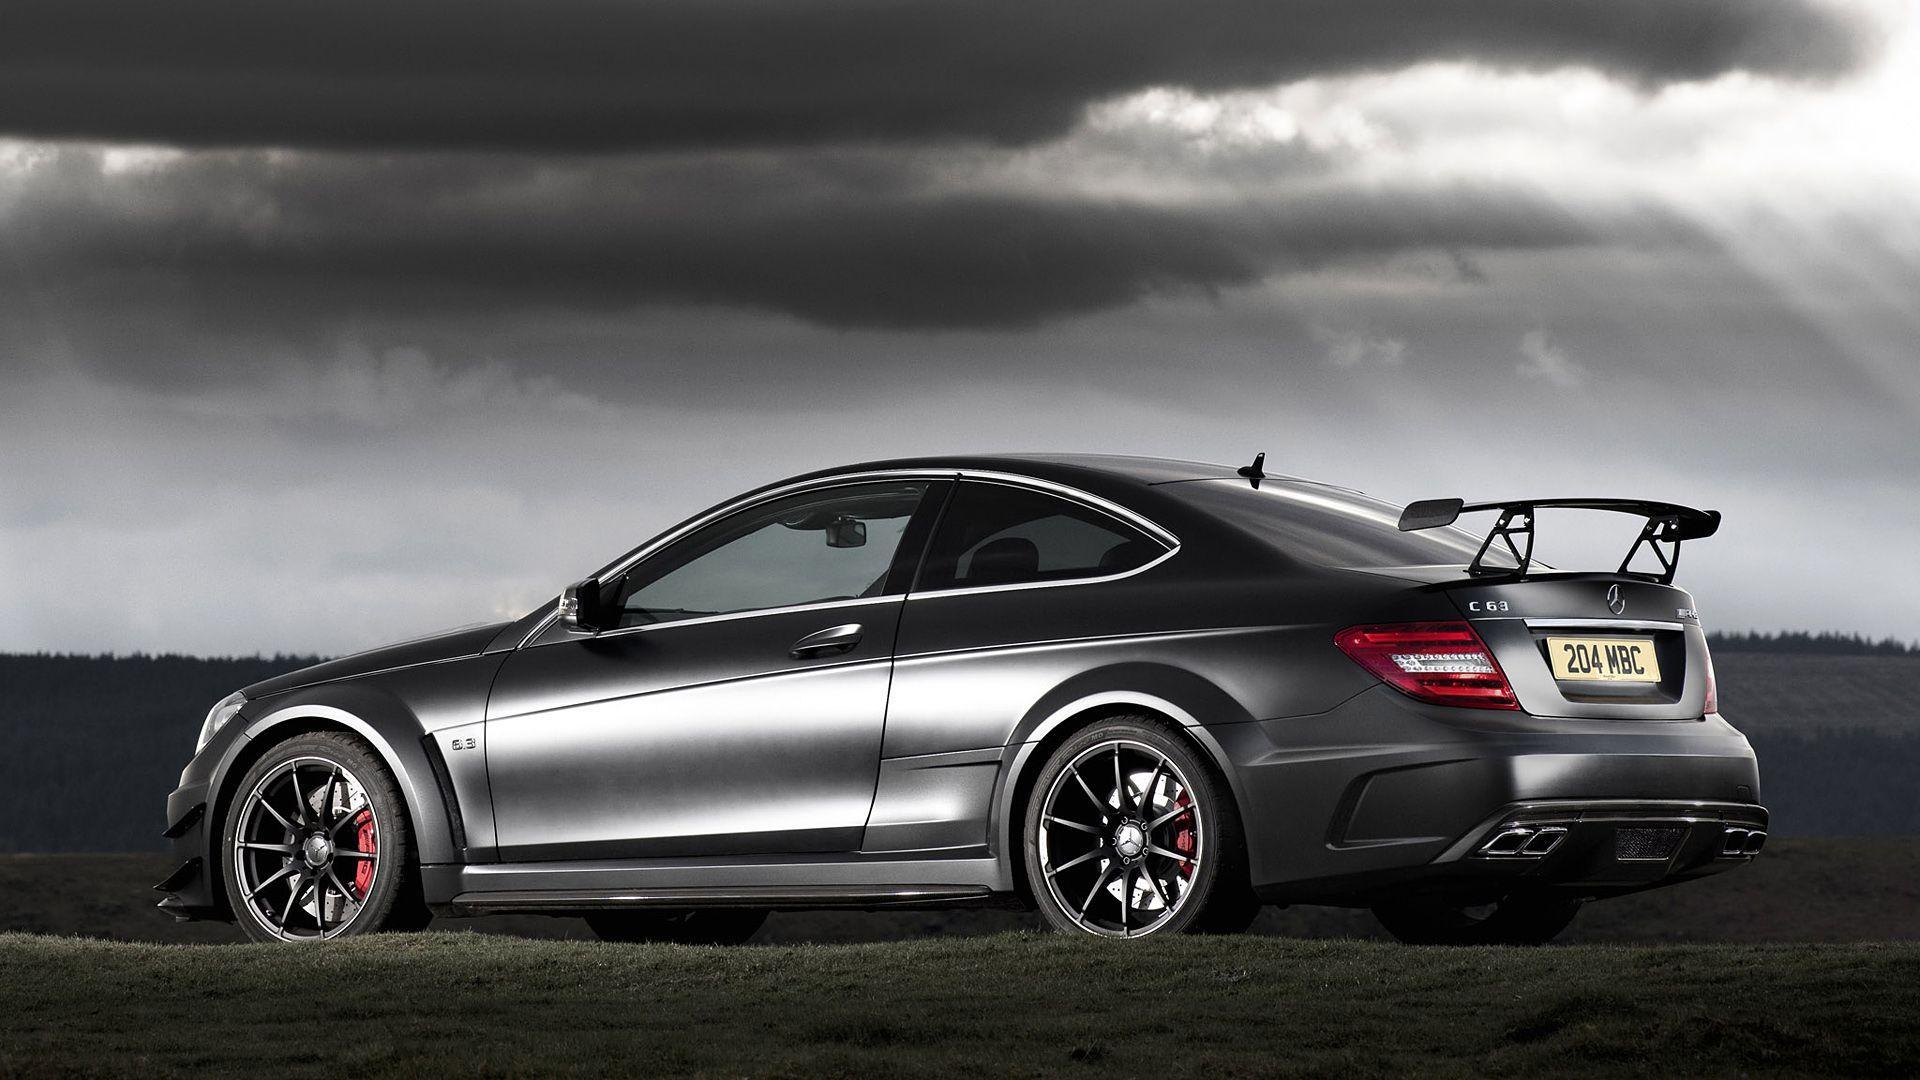 AMG C63 Wallpapers